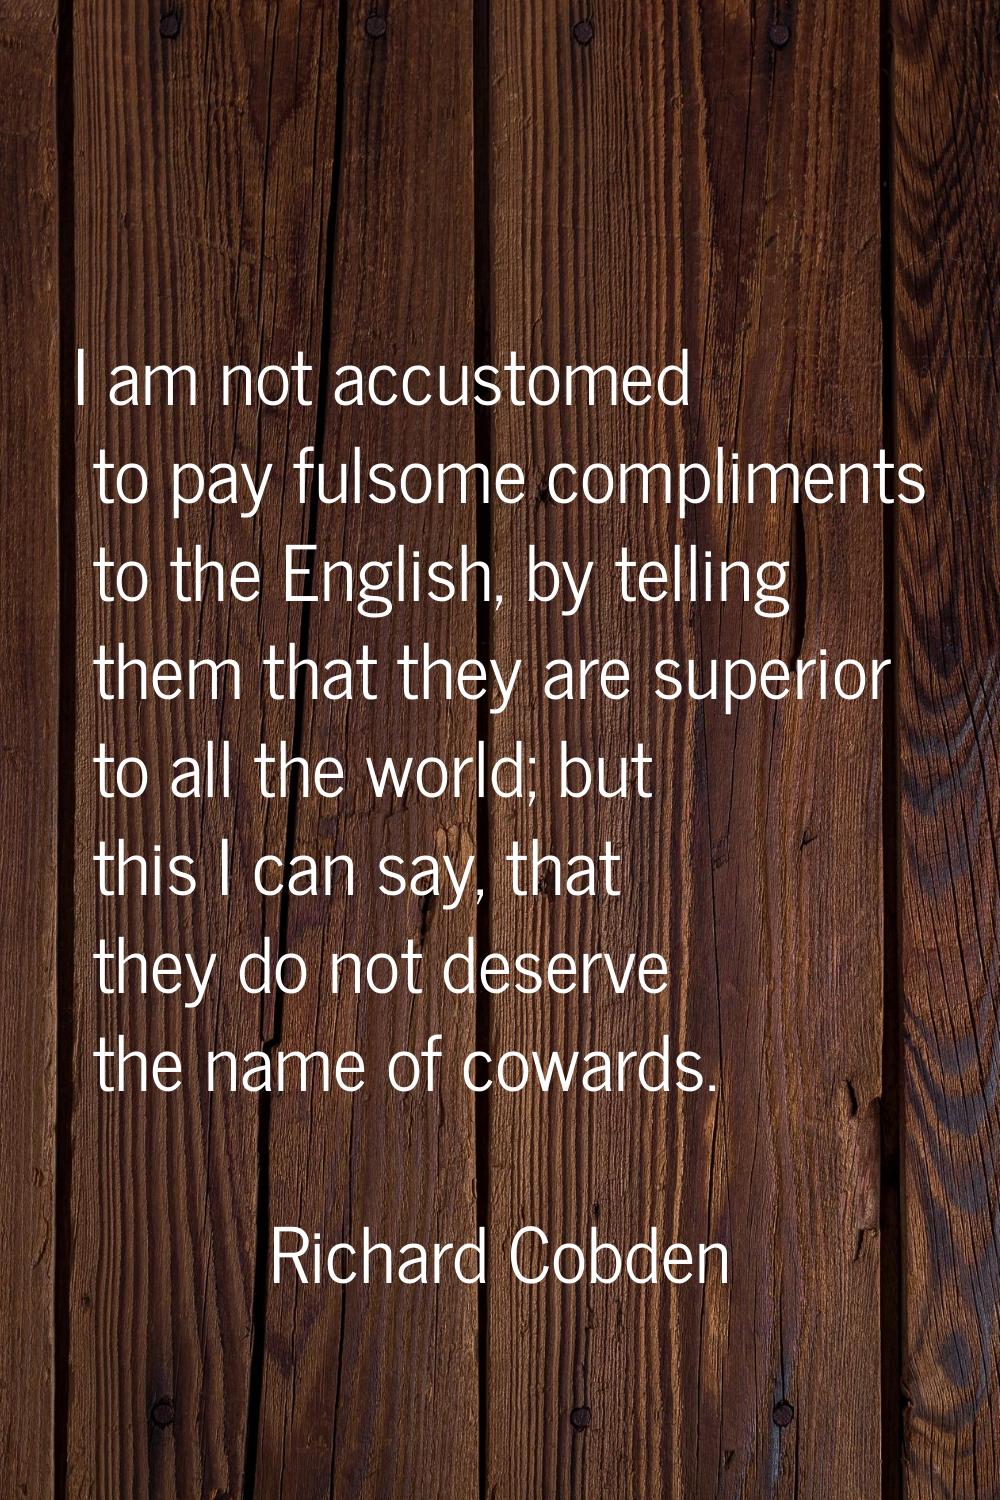 I am not accustomed to pay fulsome compliments to the English, by telling them that they are superi